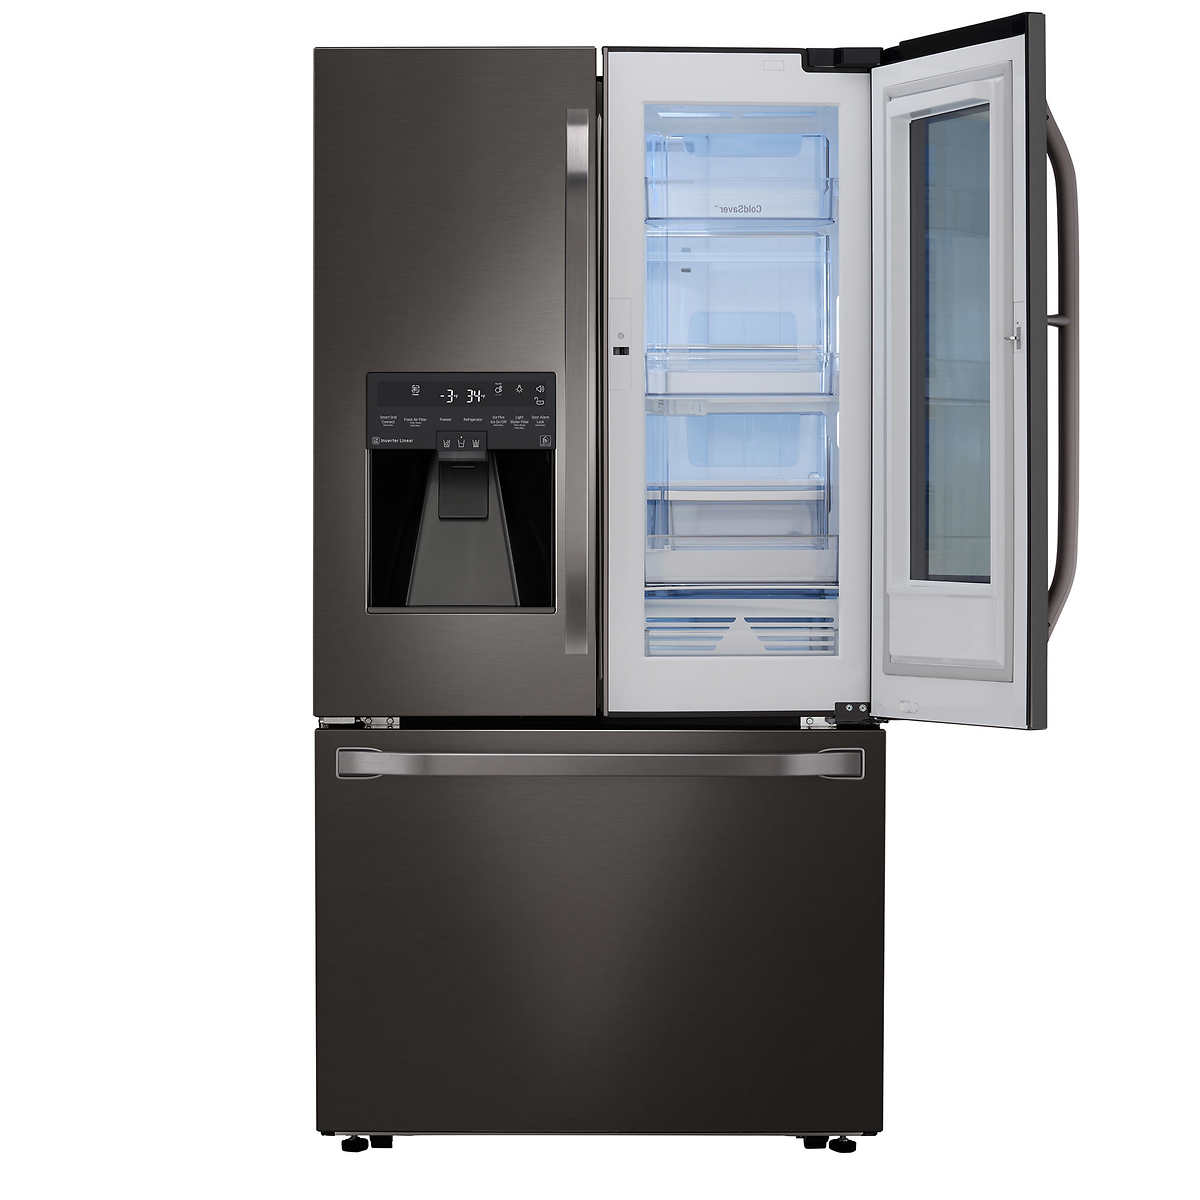 Should you buy a refrigerator without an ice maker?